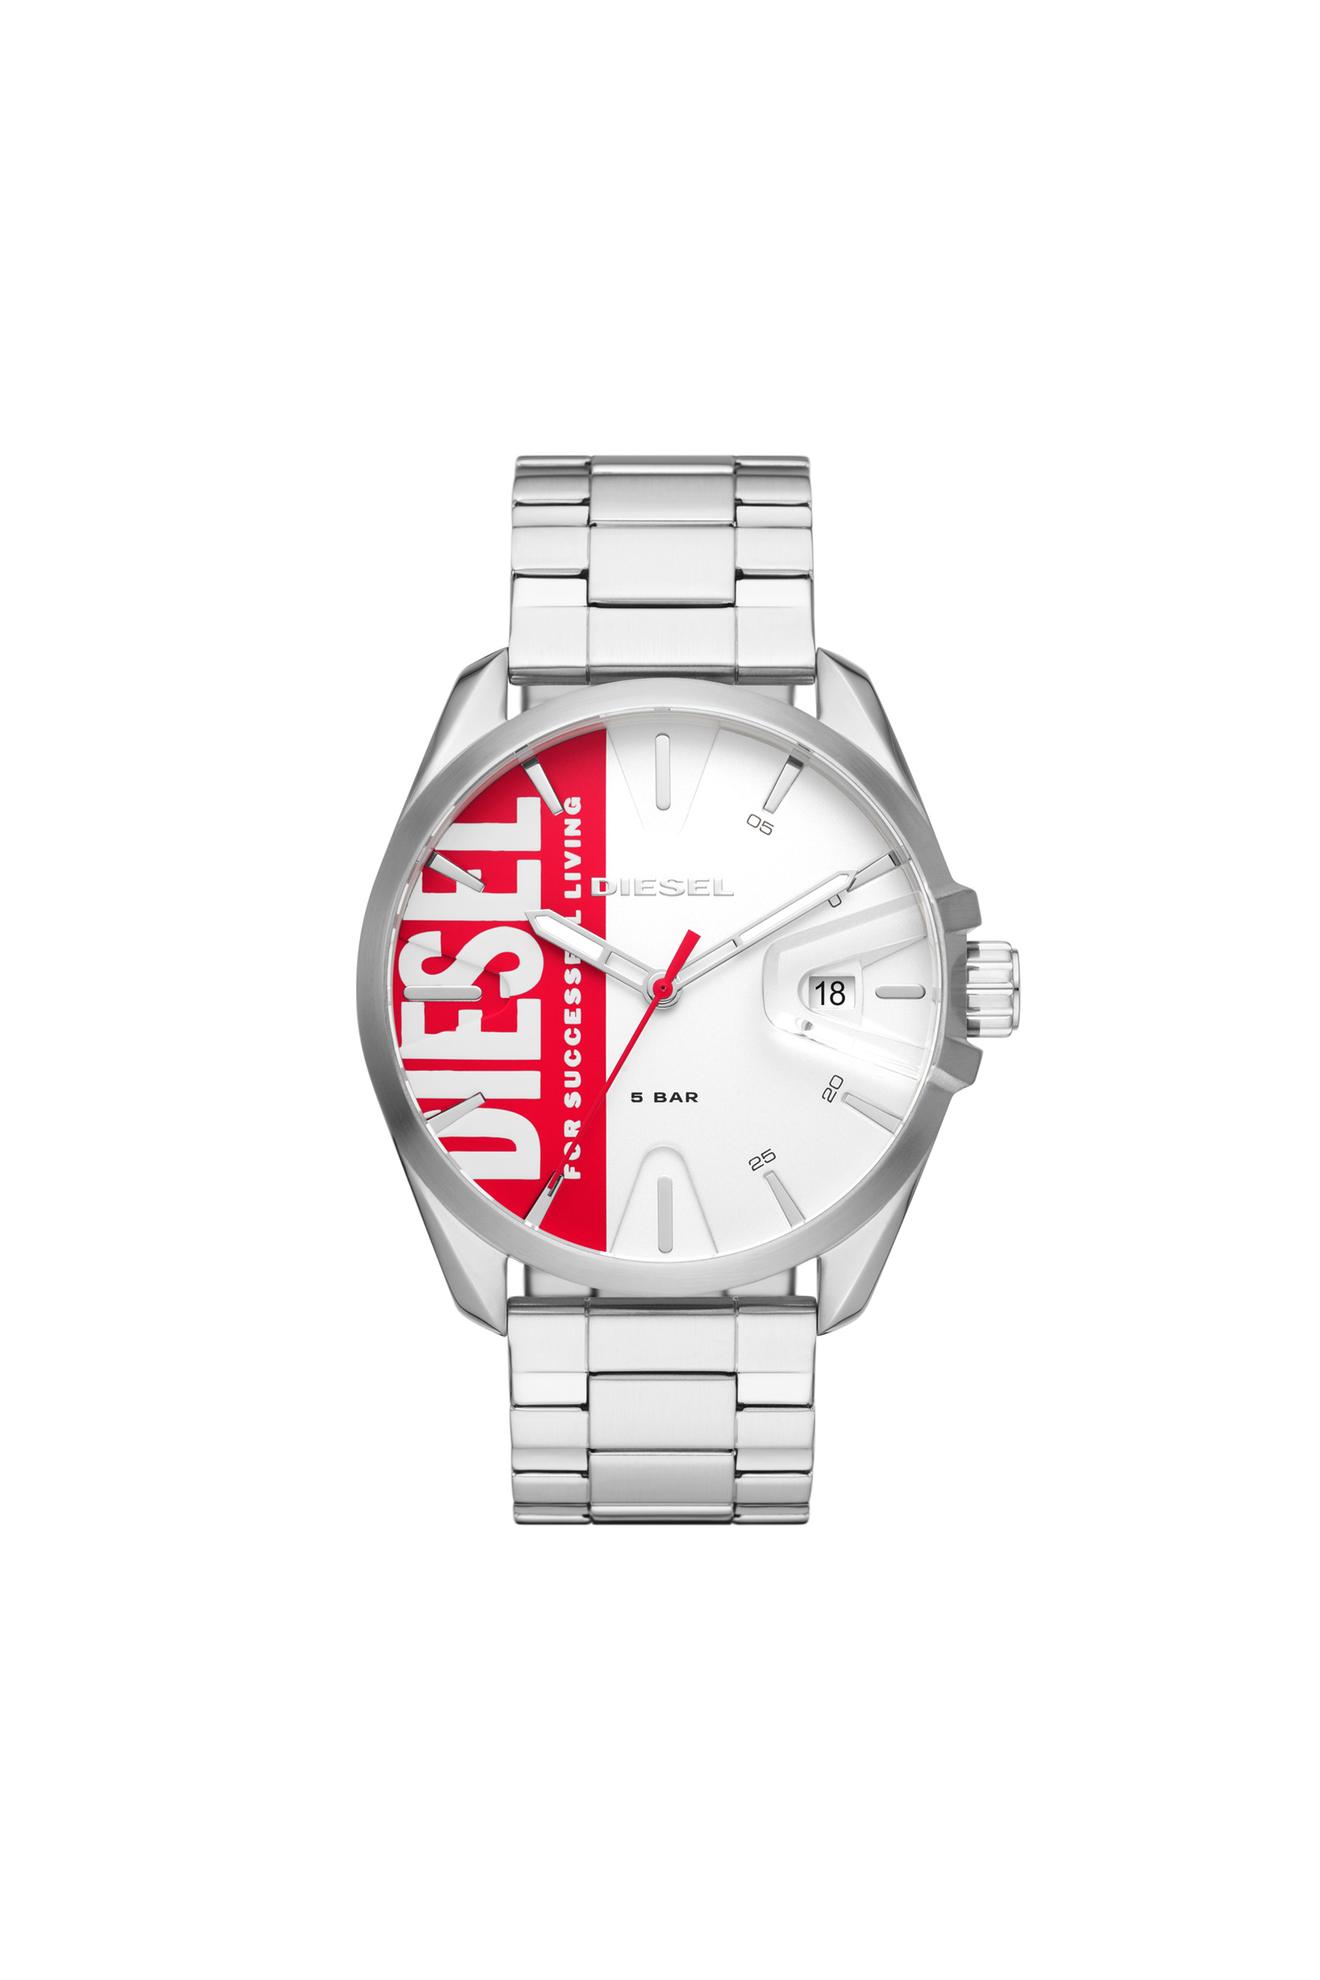 MS9 three-hand date stainless steel watch offers at $199 in Diesel